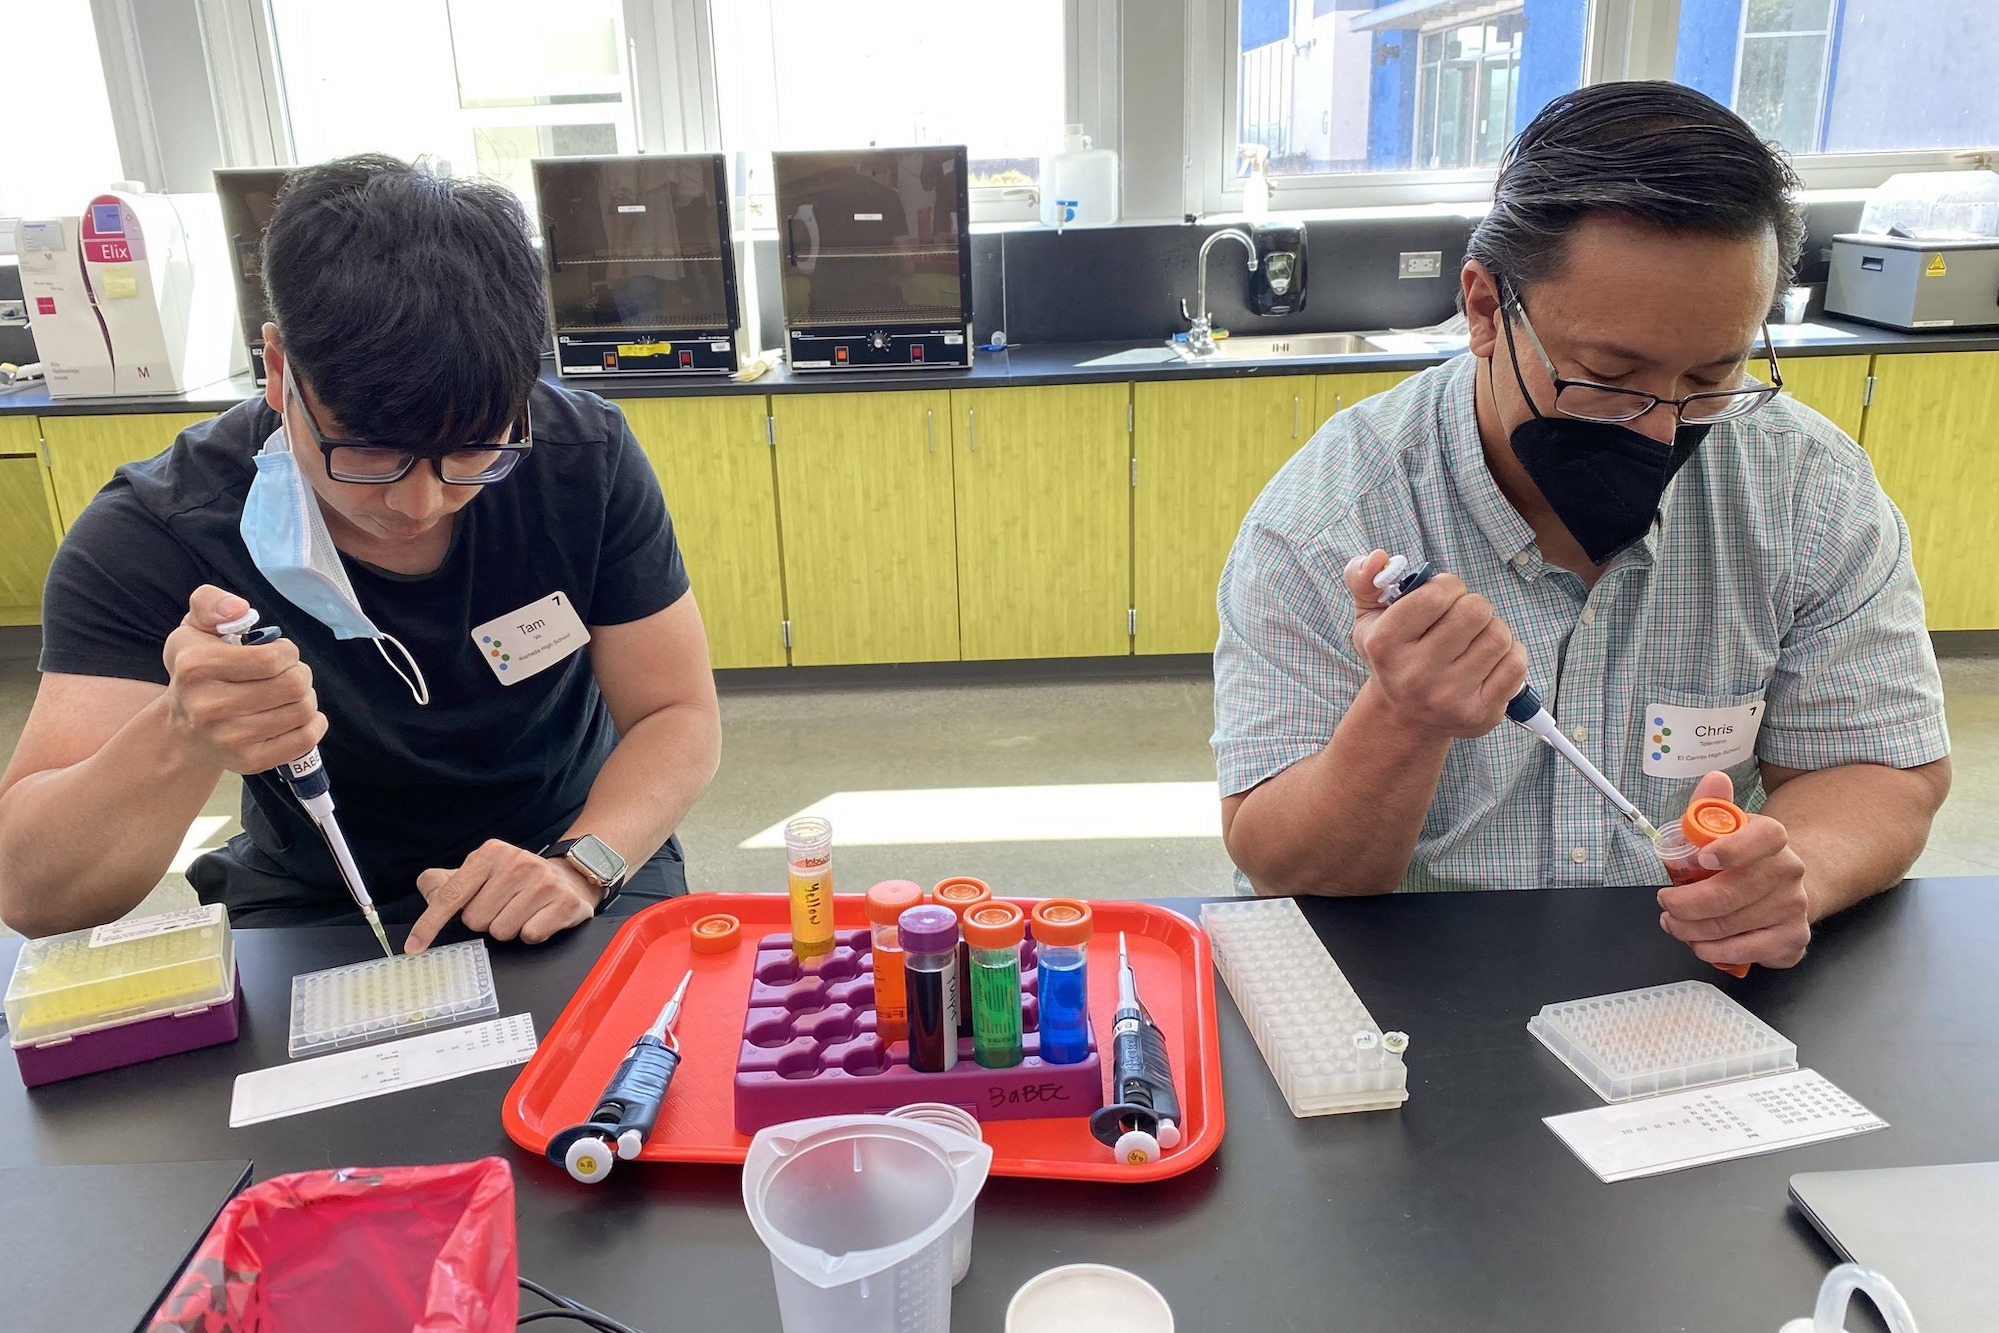 “Looking at the high level of performance at Genentech – where they get the foundations in high school – is beneficial, not just to me as a teacher, but to future generations.” – Chris Tolentino, El Cerrito High School (pictured right)